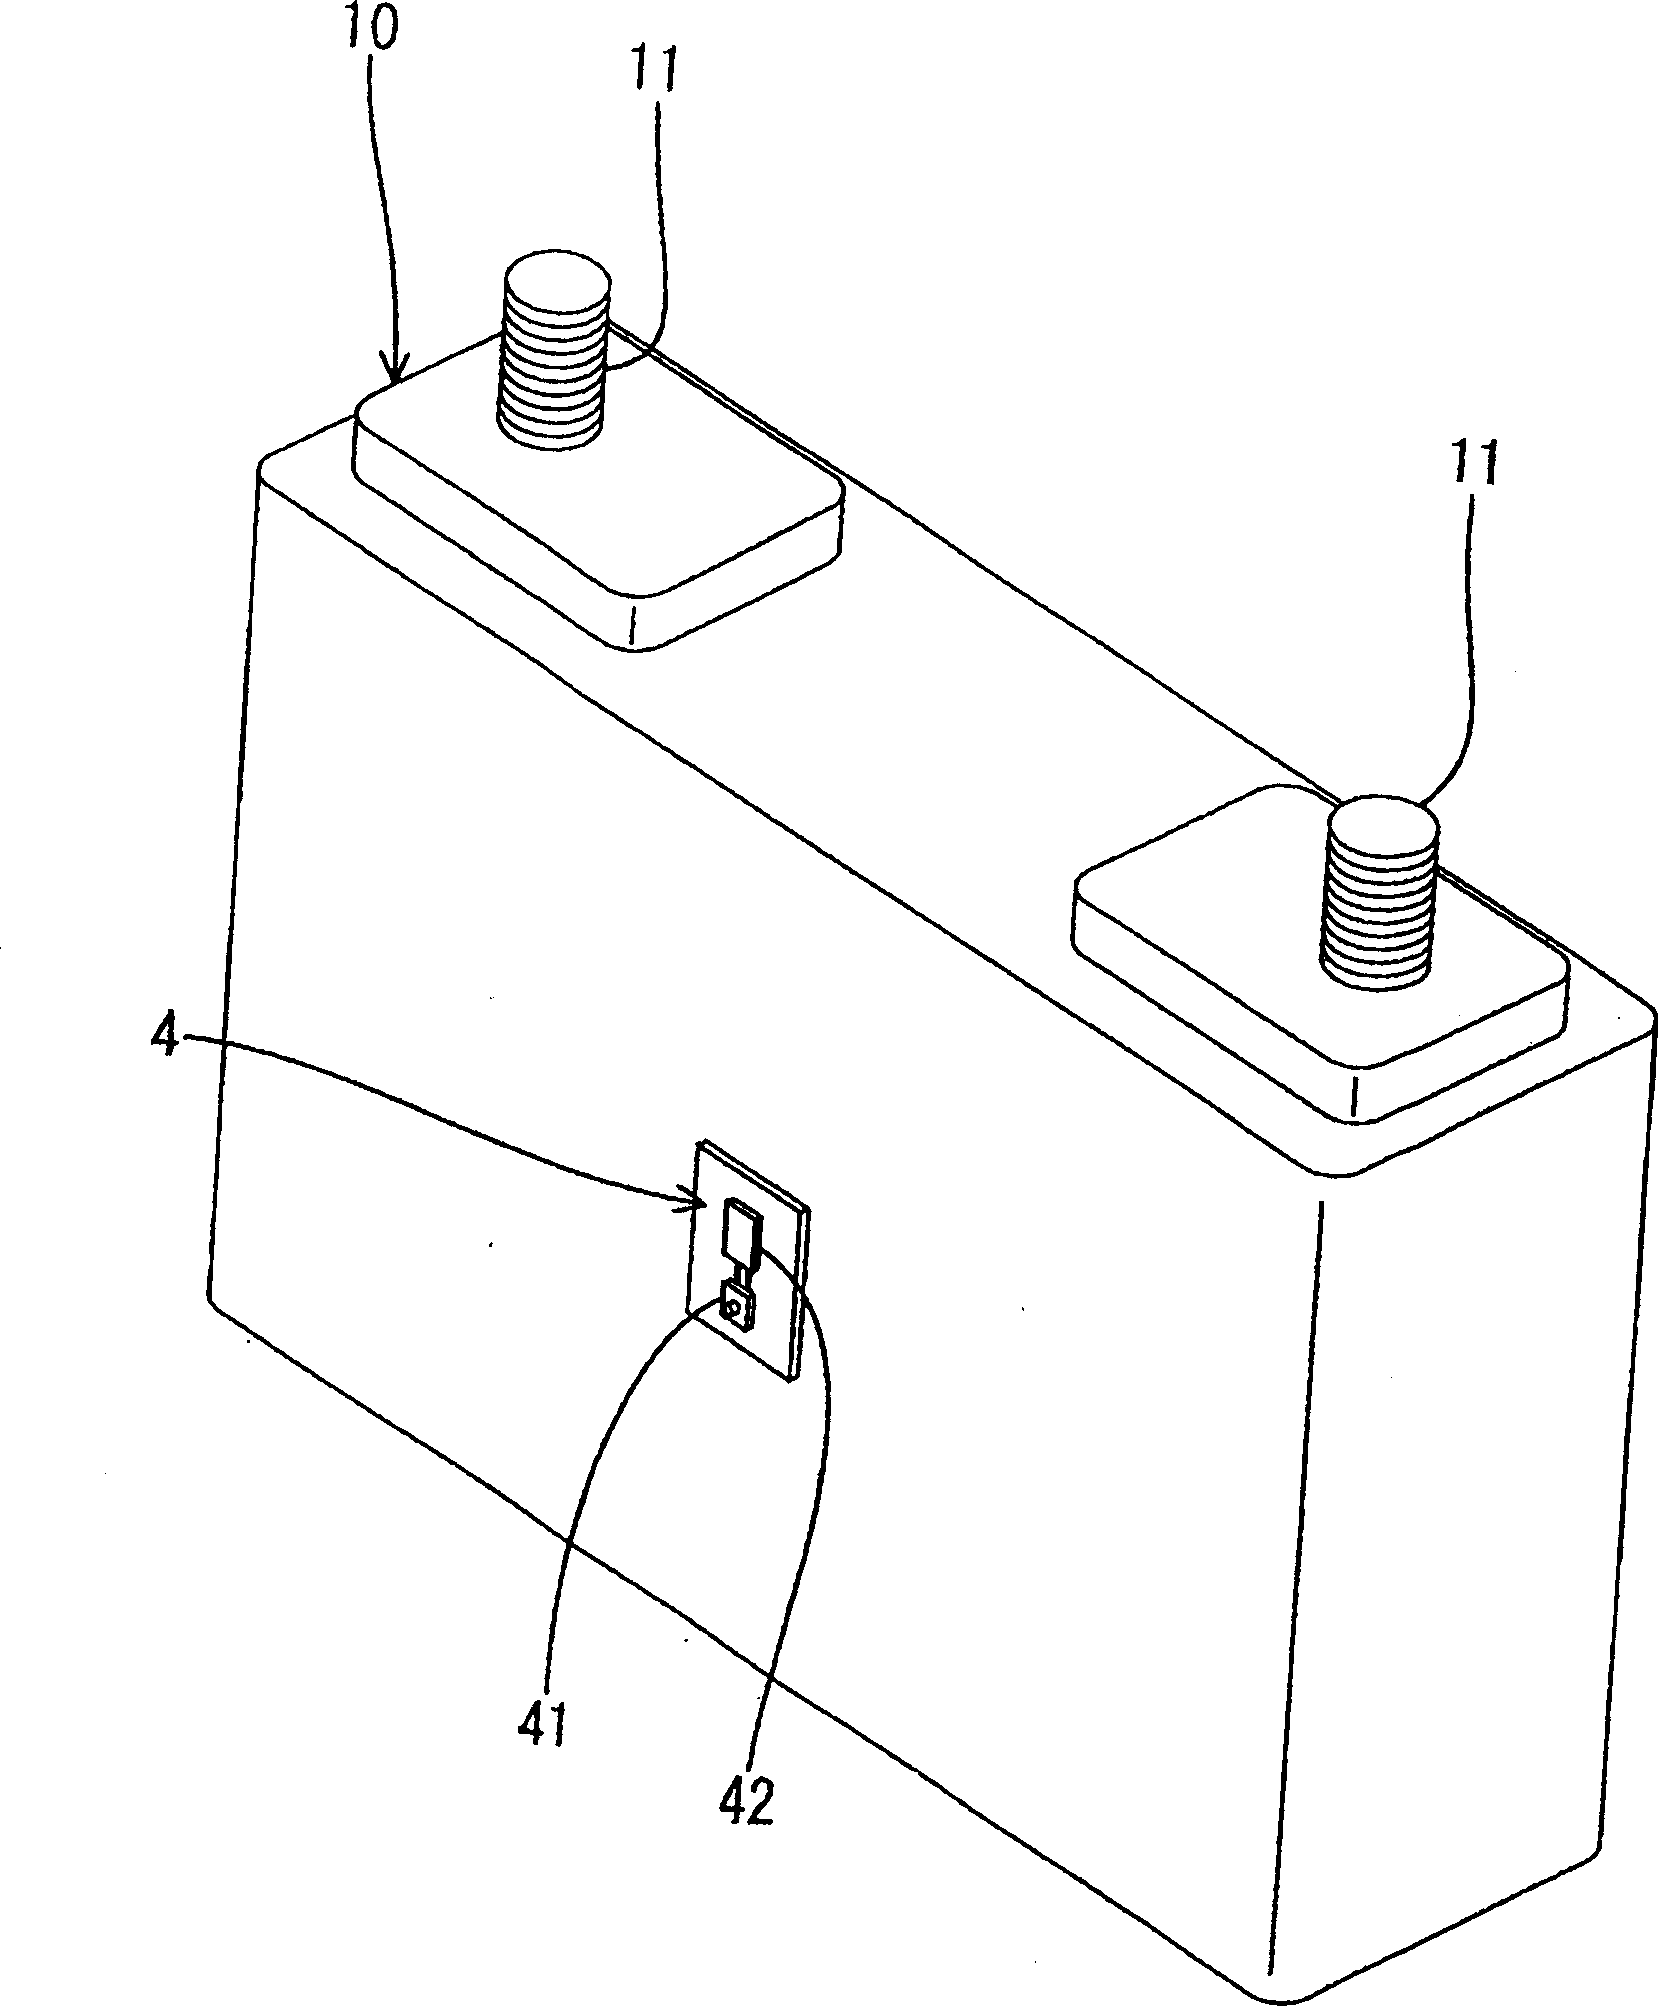 Combined battery device and power source appts. comprising it